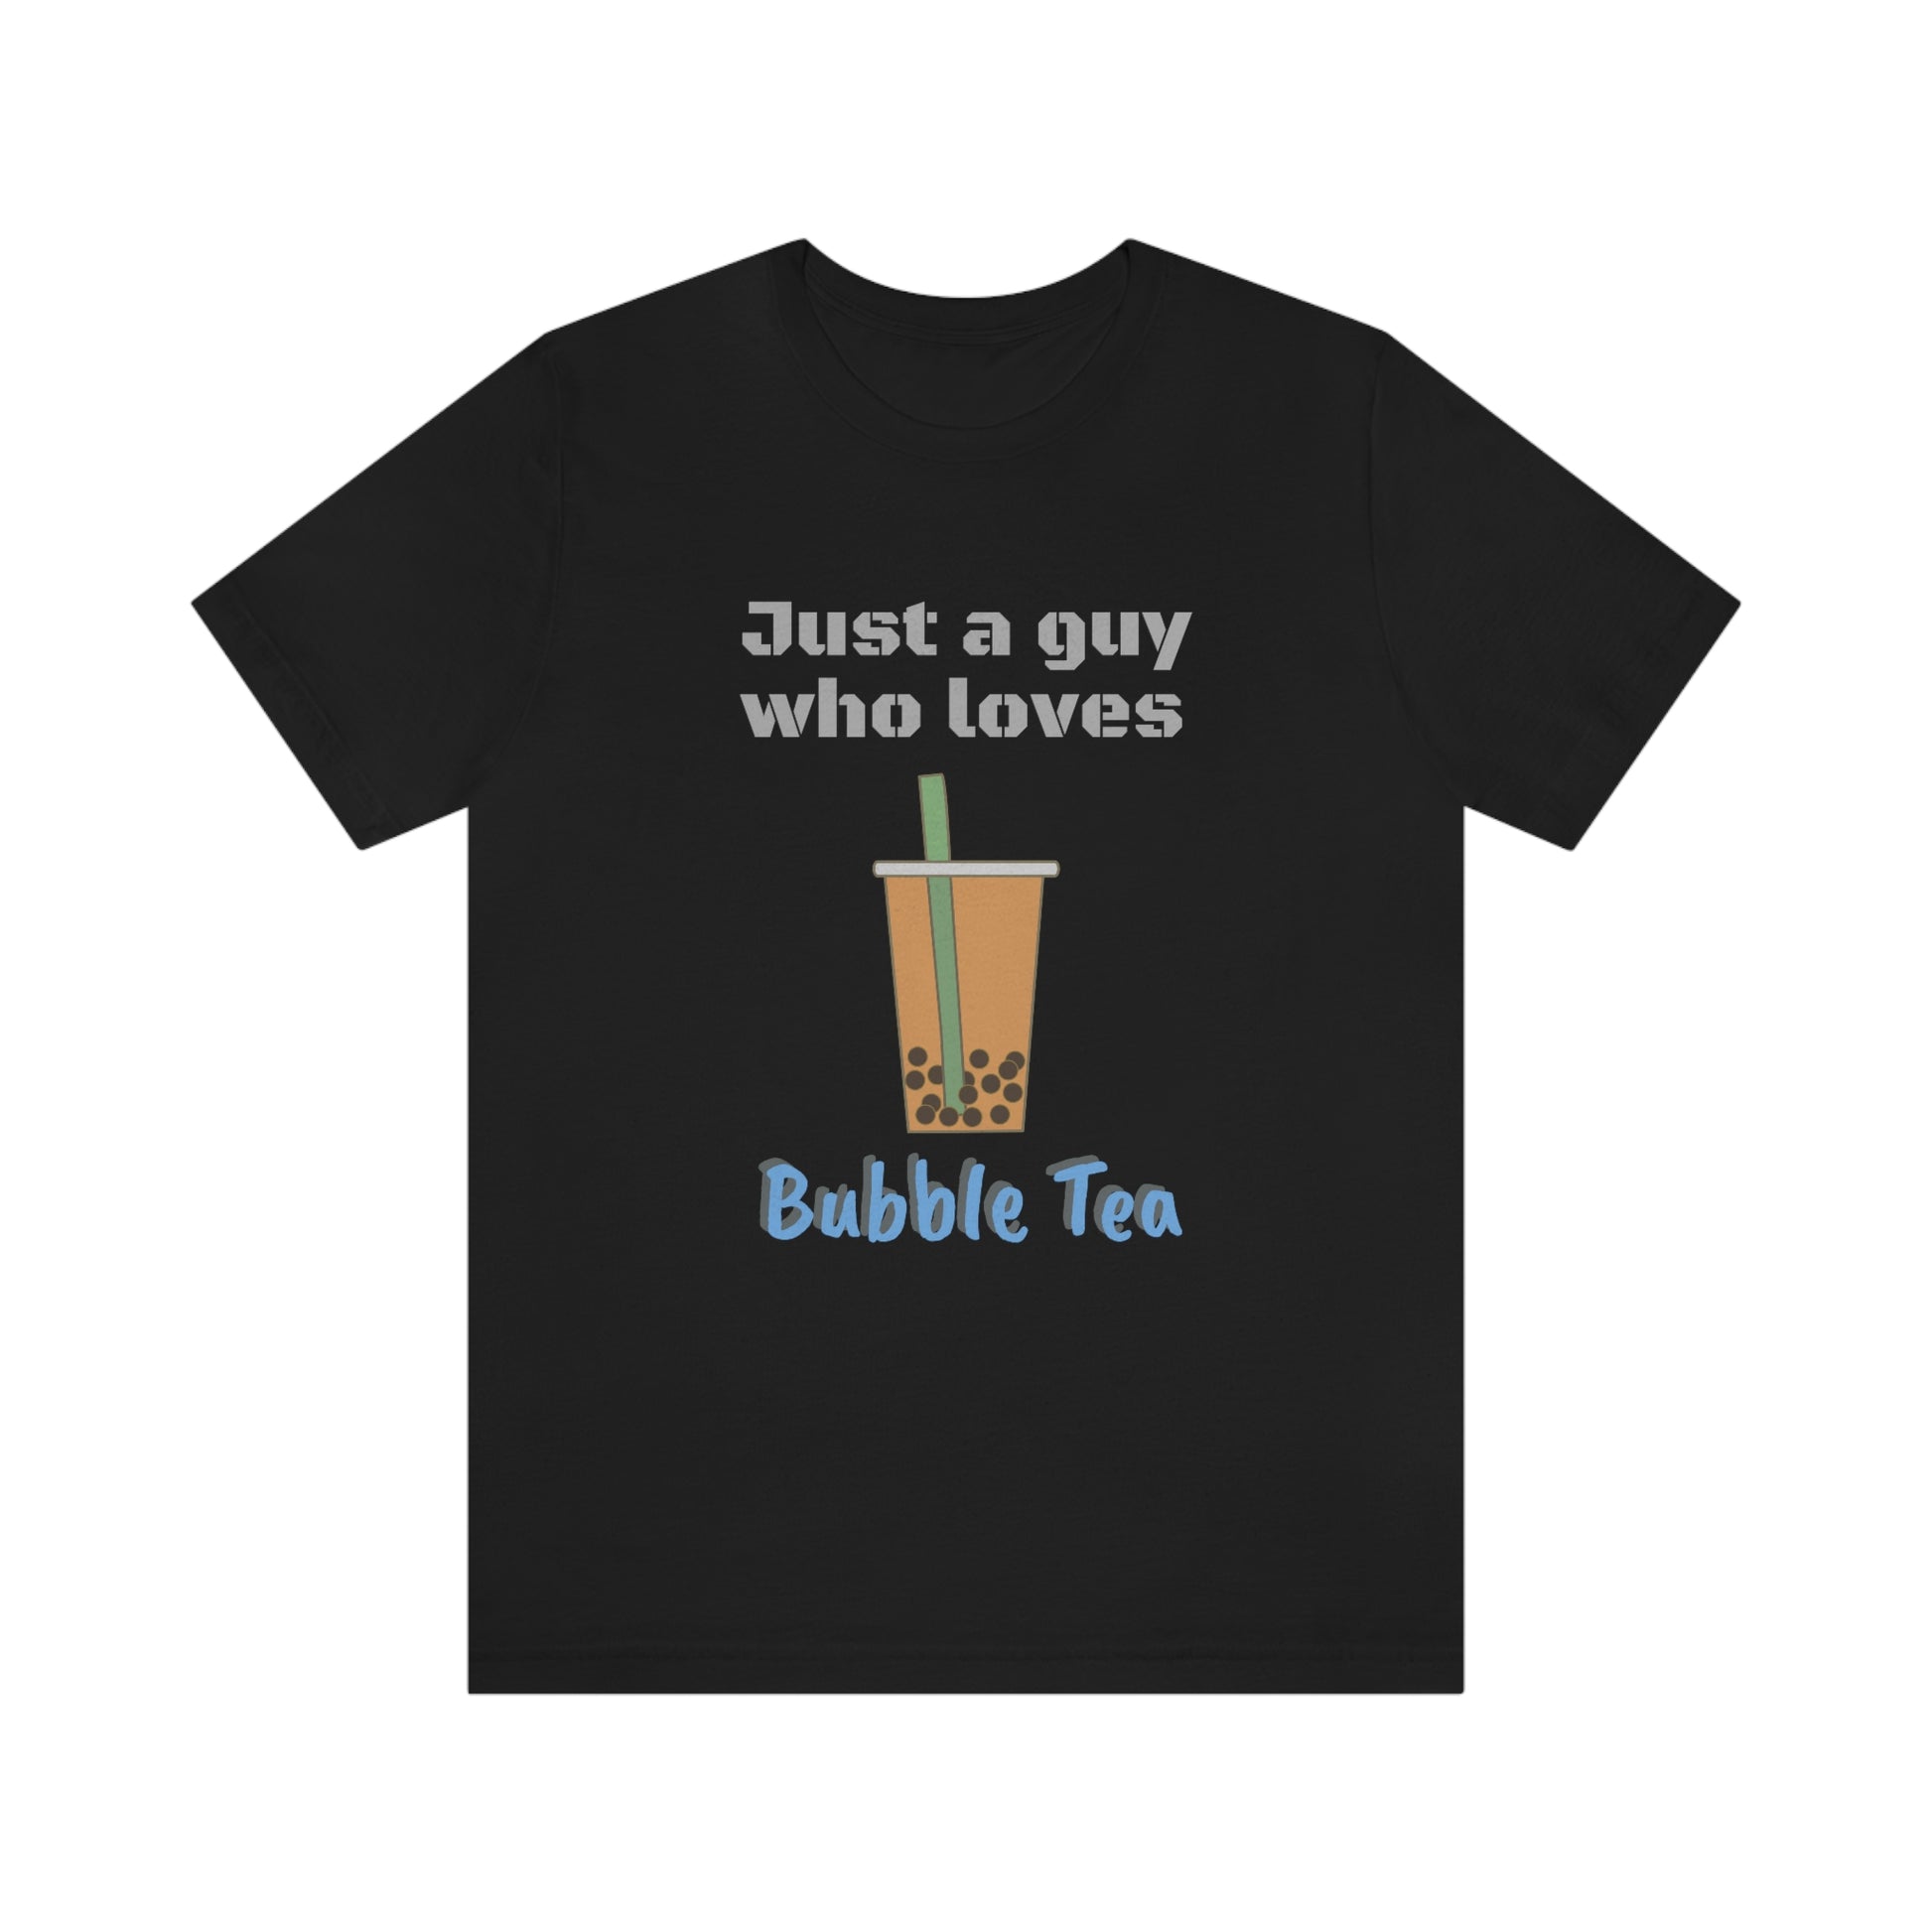 Just a guy who loves bubble tea - Designed - Unisex Short Sleeve Tee - CrazyTomTShirts